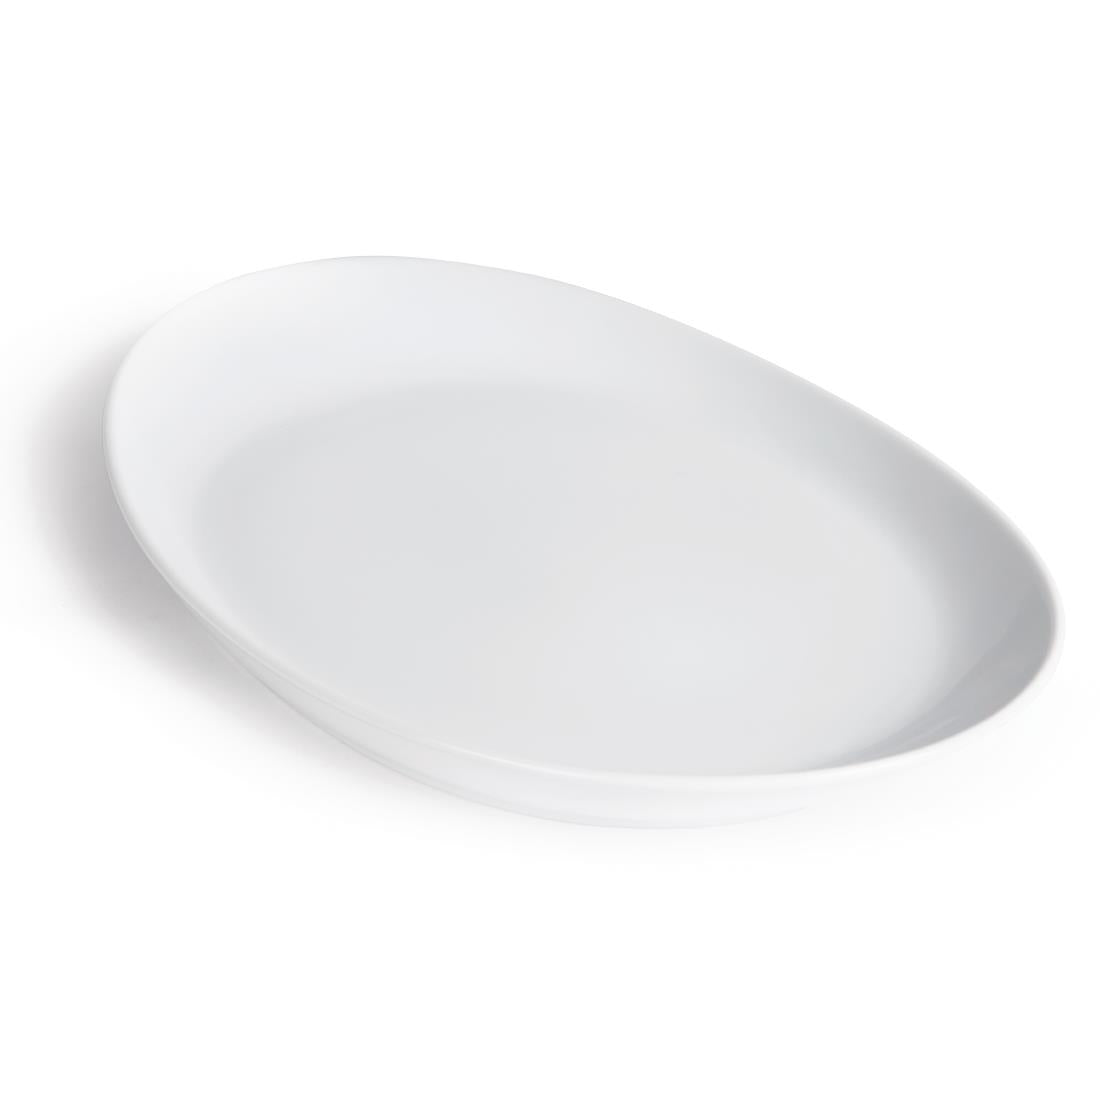 Royal Porcelain Classic White Oval Plates 340mm (Pack of 12)